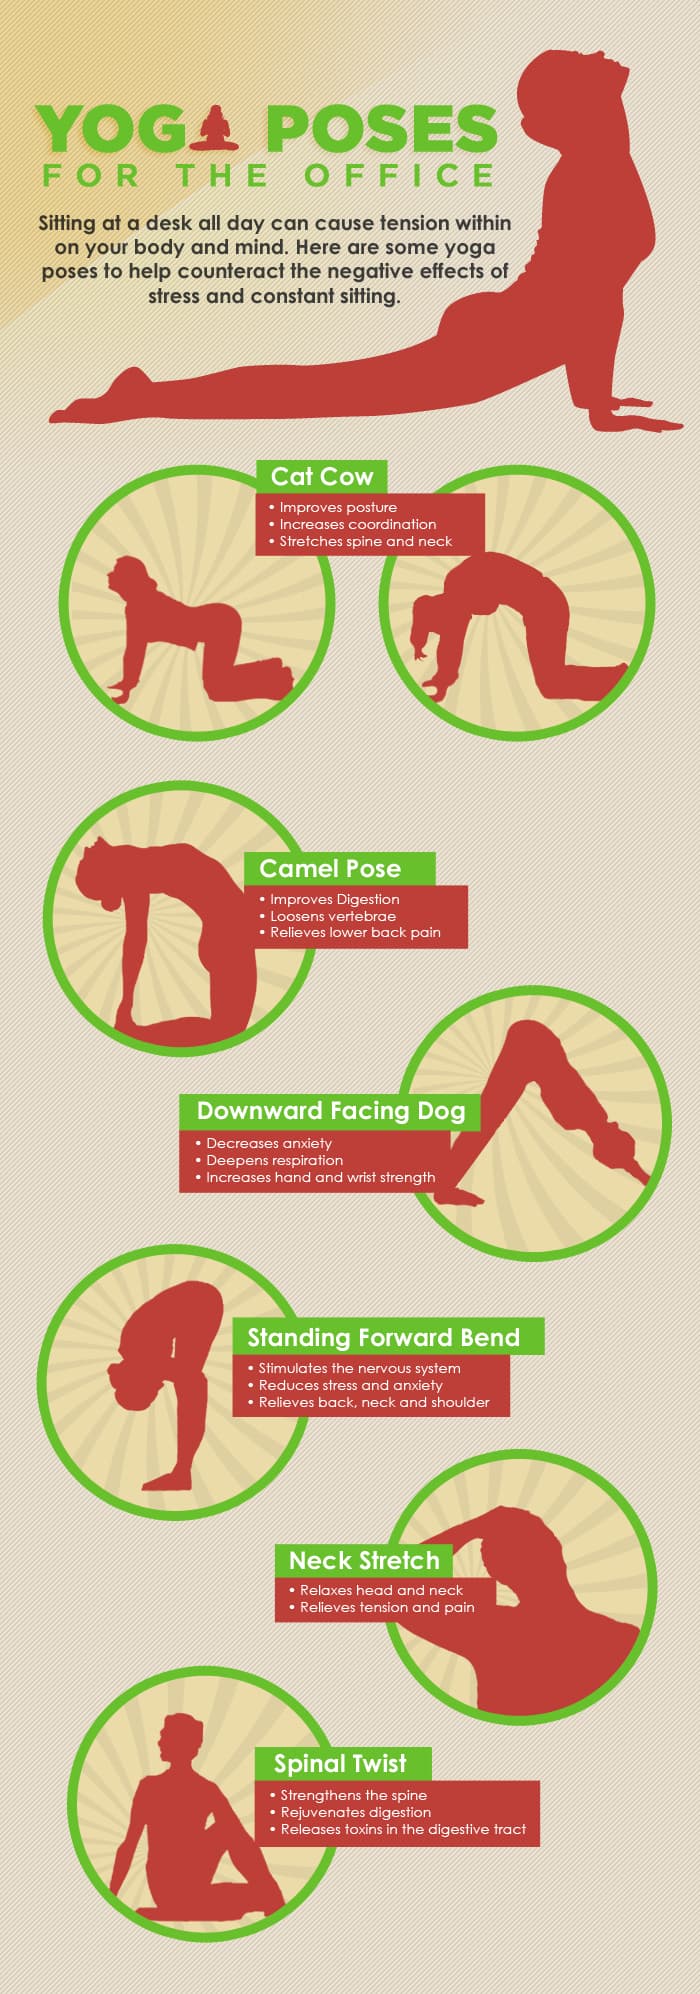 9 Yoga Poses You Can Do At Your Desk Without Looking Really Weird  (Infographic) | Entrepreneur